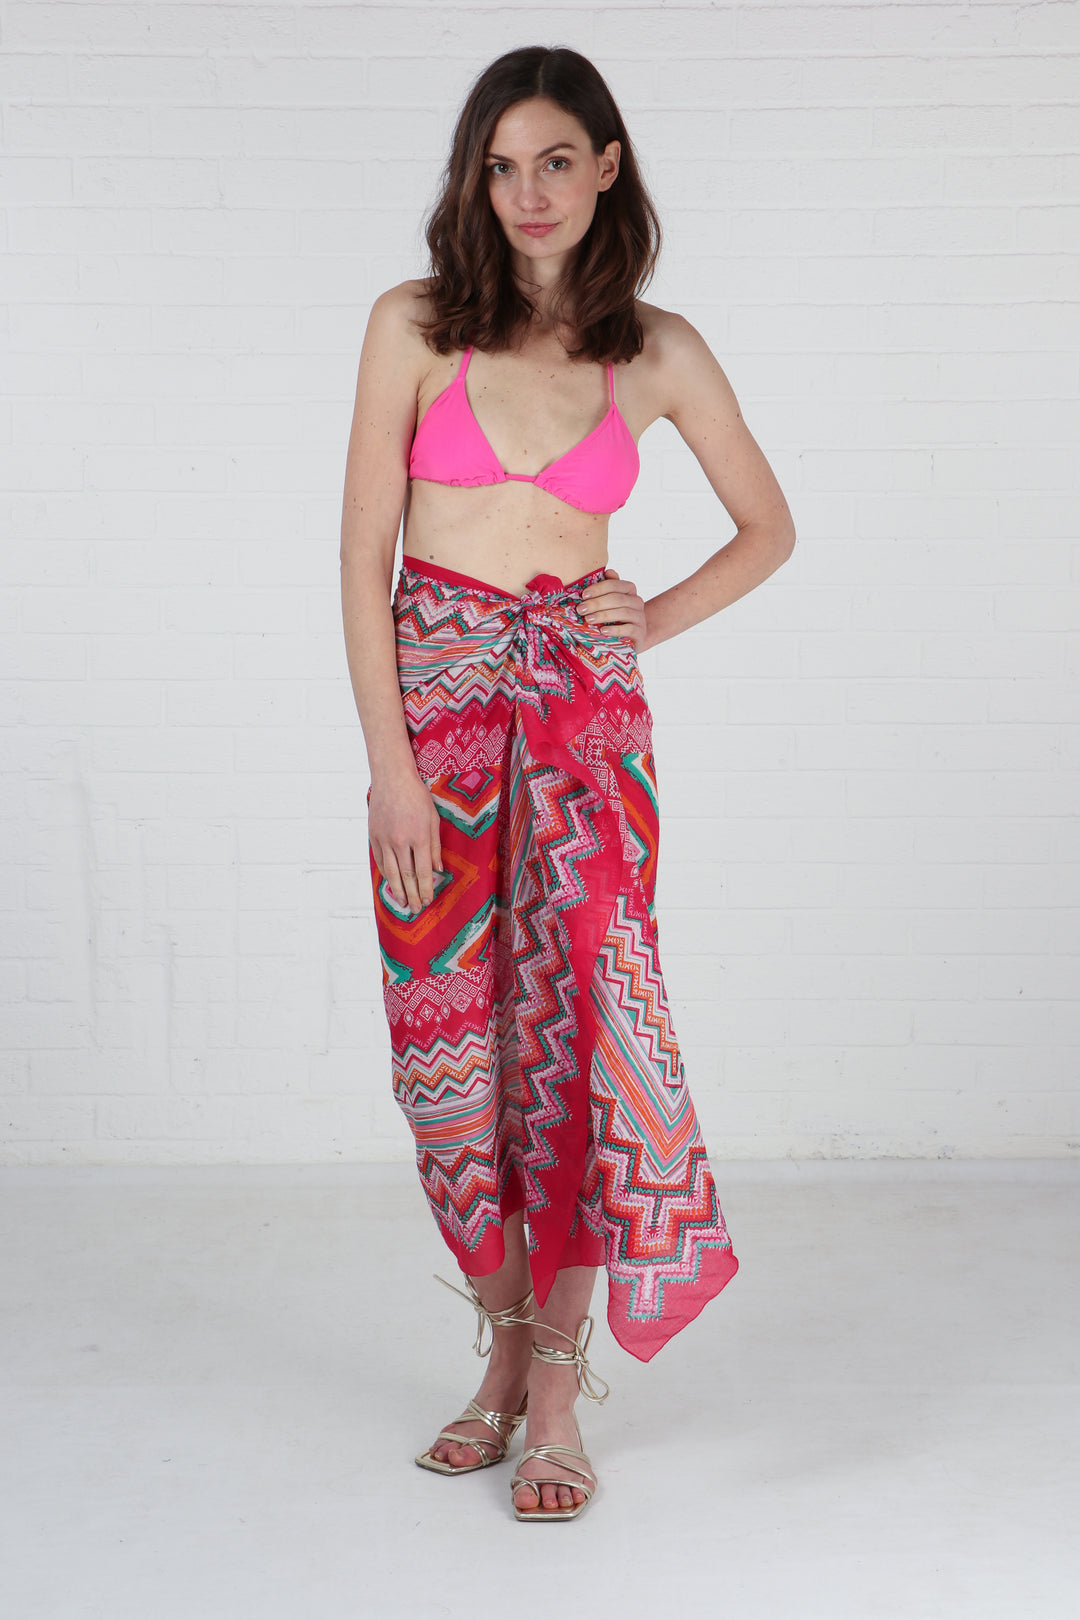 model wearing a pink geometric print scarf as a beach cover up sarong